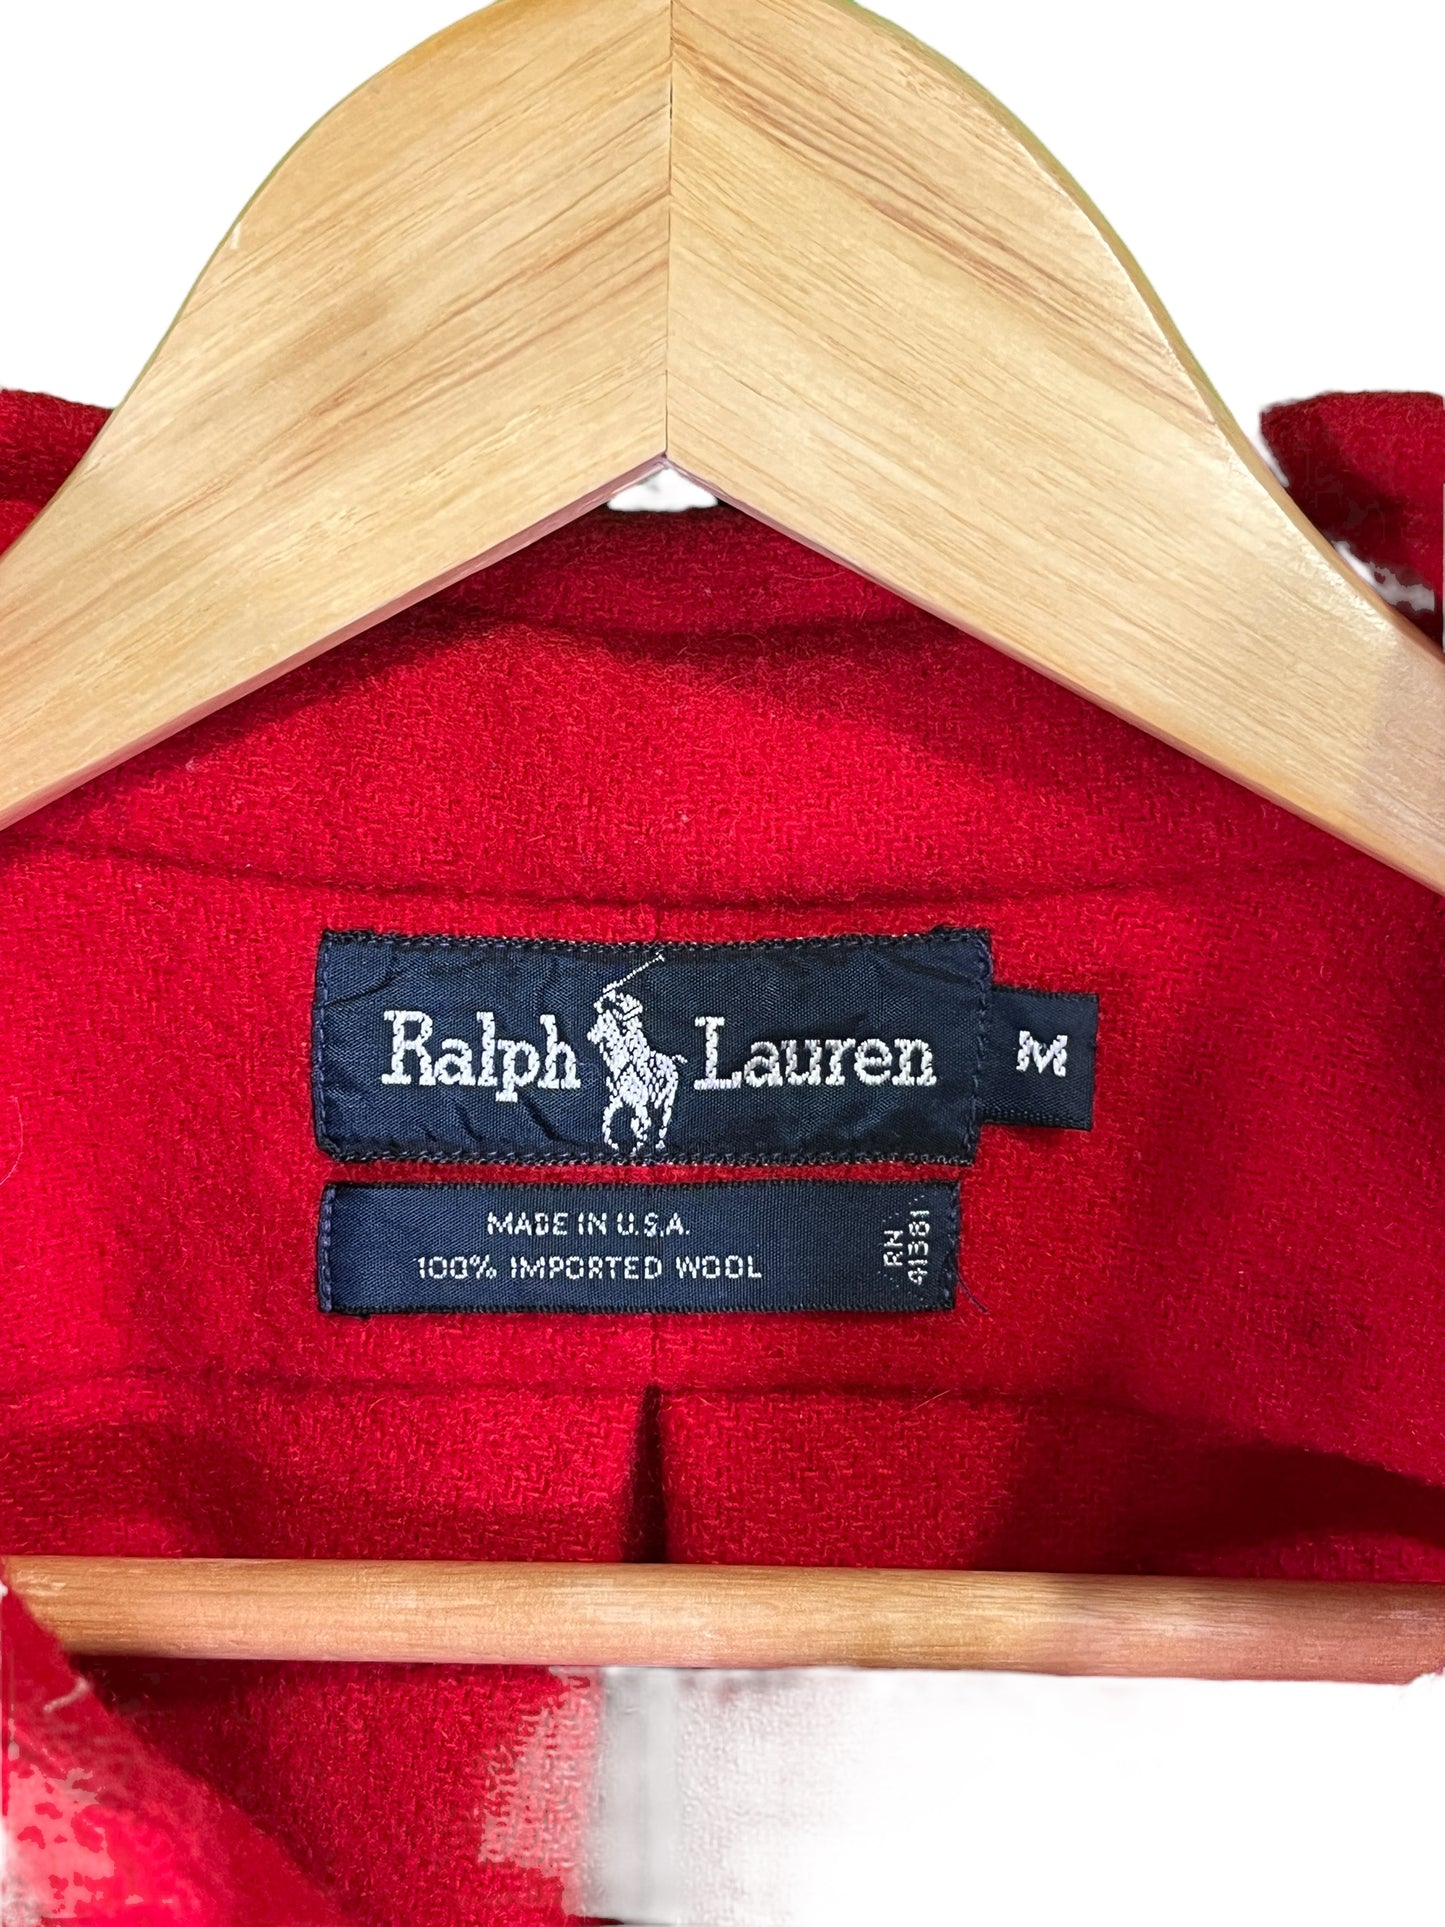 Vintage Polo Ralph Lauren Made in USA Red Wool Button Up Size Medium